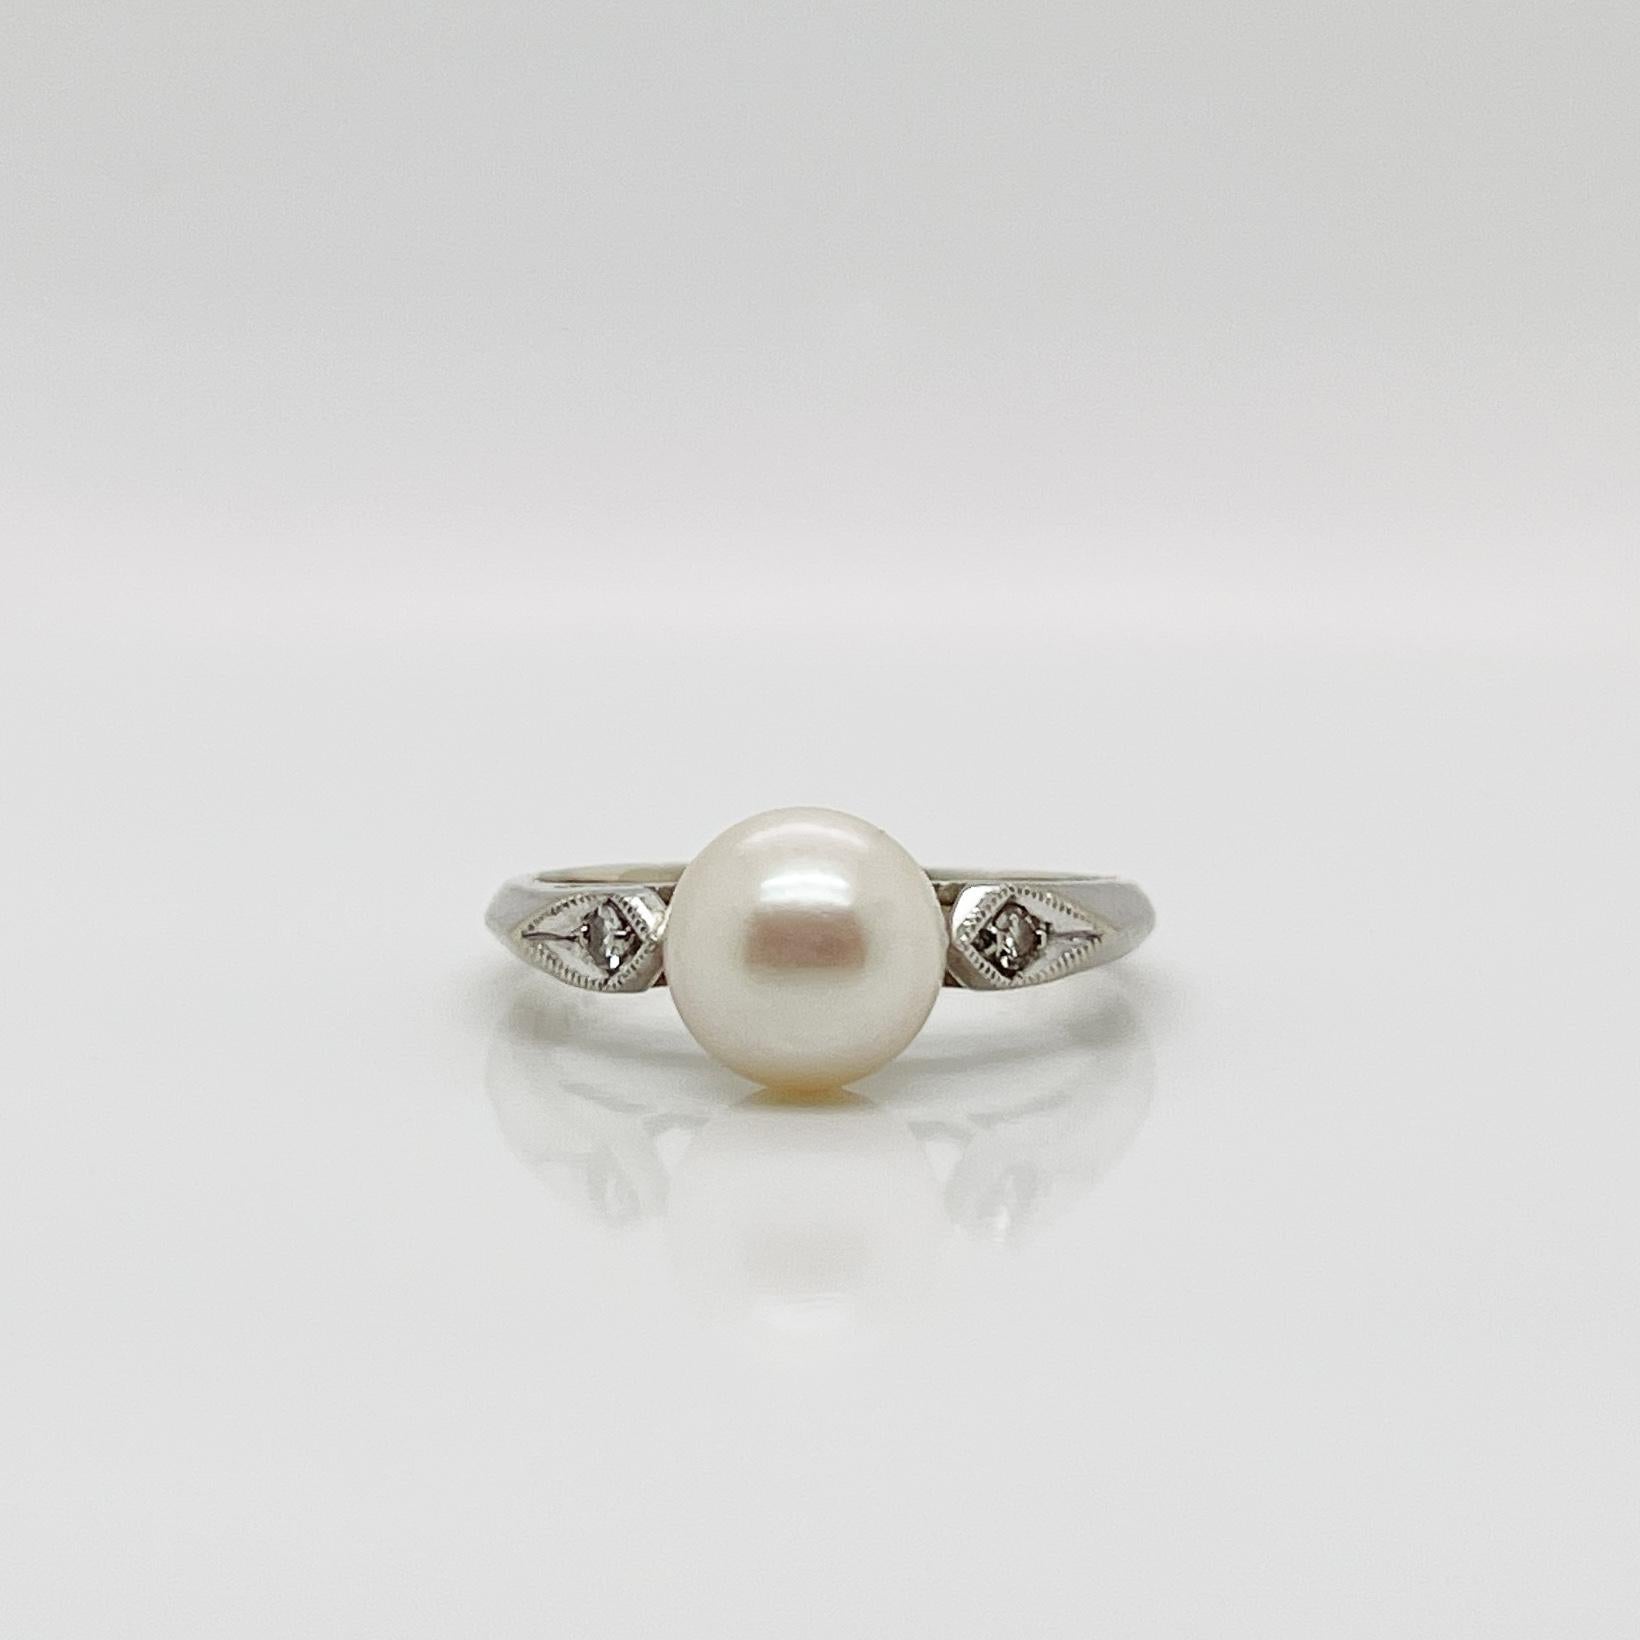 A fine Retro signed pearl cocktail ring.

In 14k white gold.

Set with 7mm round white pearl and flanked by two small accent diamonds on the shoulder of the setting.

Marked to the shank for Rothman & Schneider of New York City.

Simply a wonderful